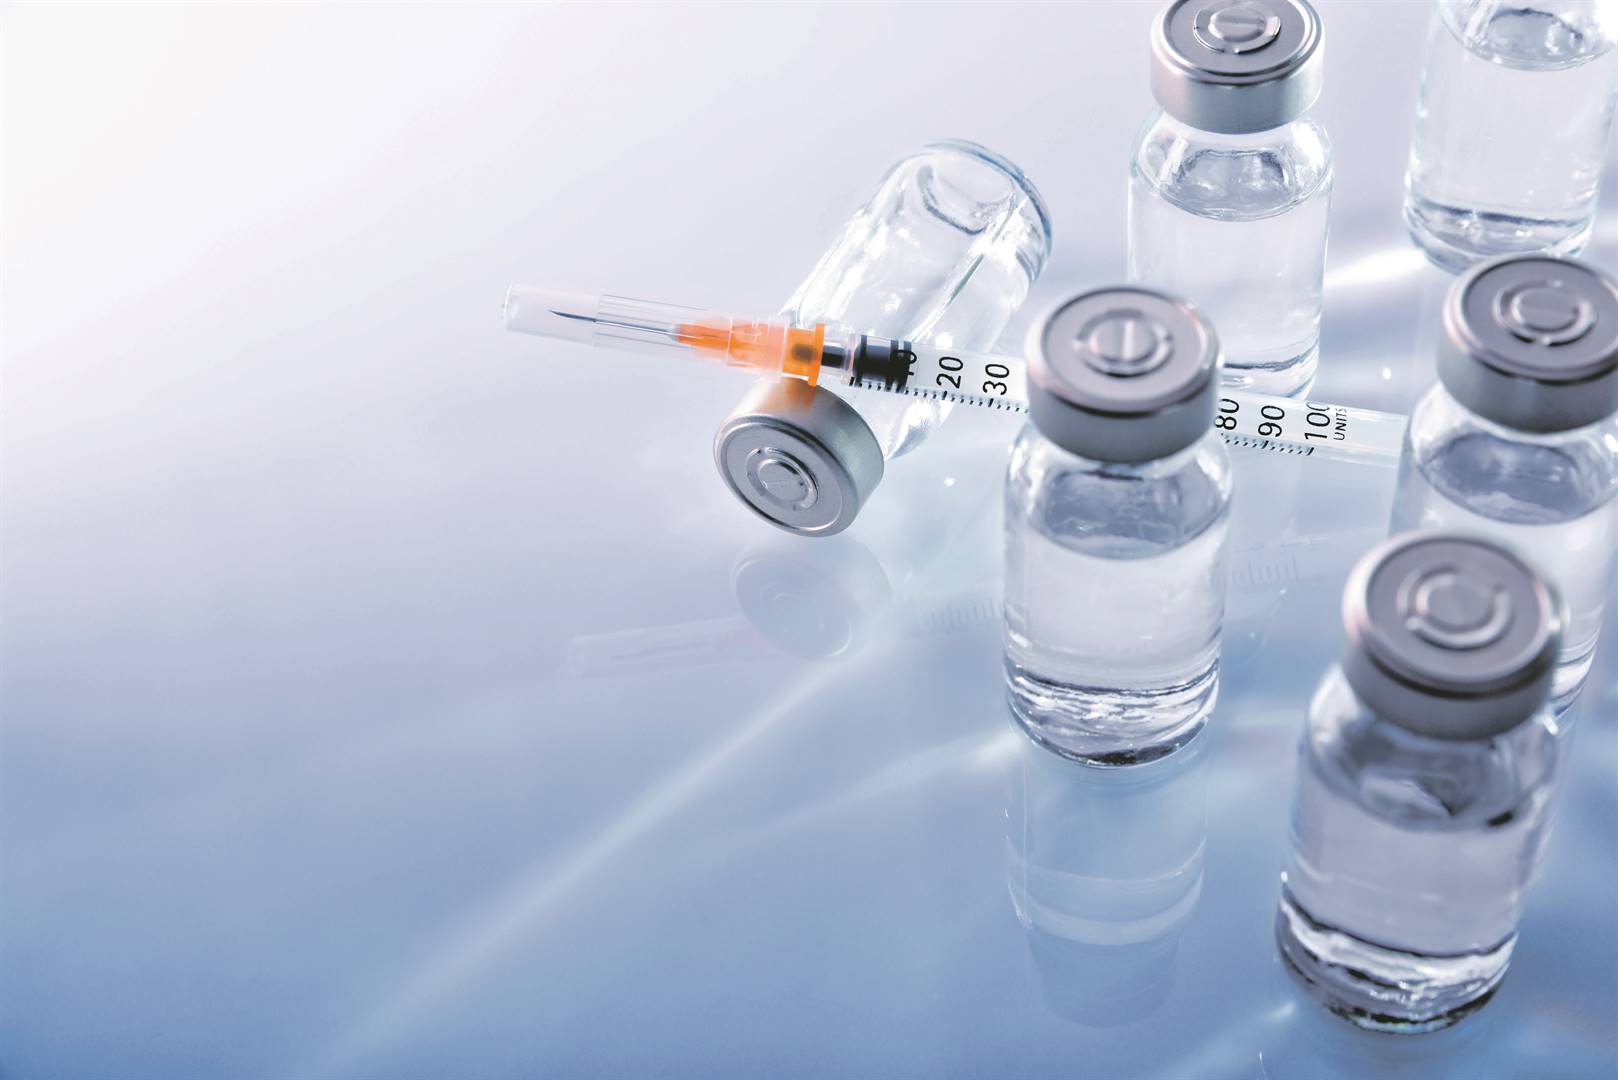 Vials with medication and syringe on blue methacrylate table. Horizontal composition. Top elevated view. Picture: Supplied